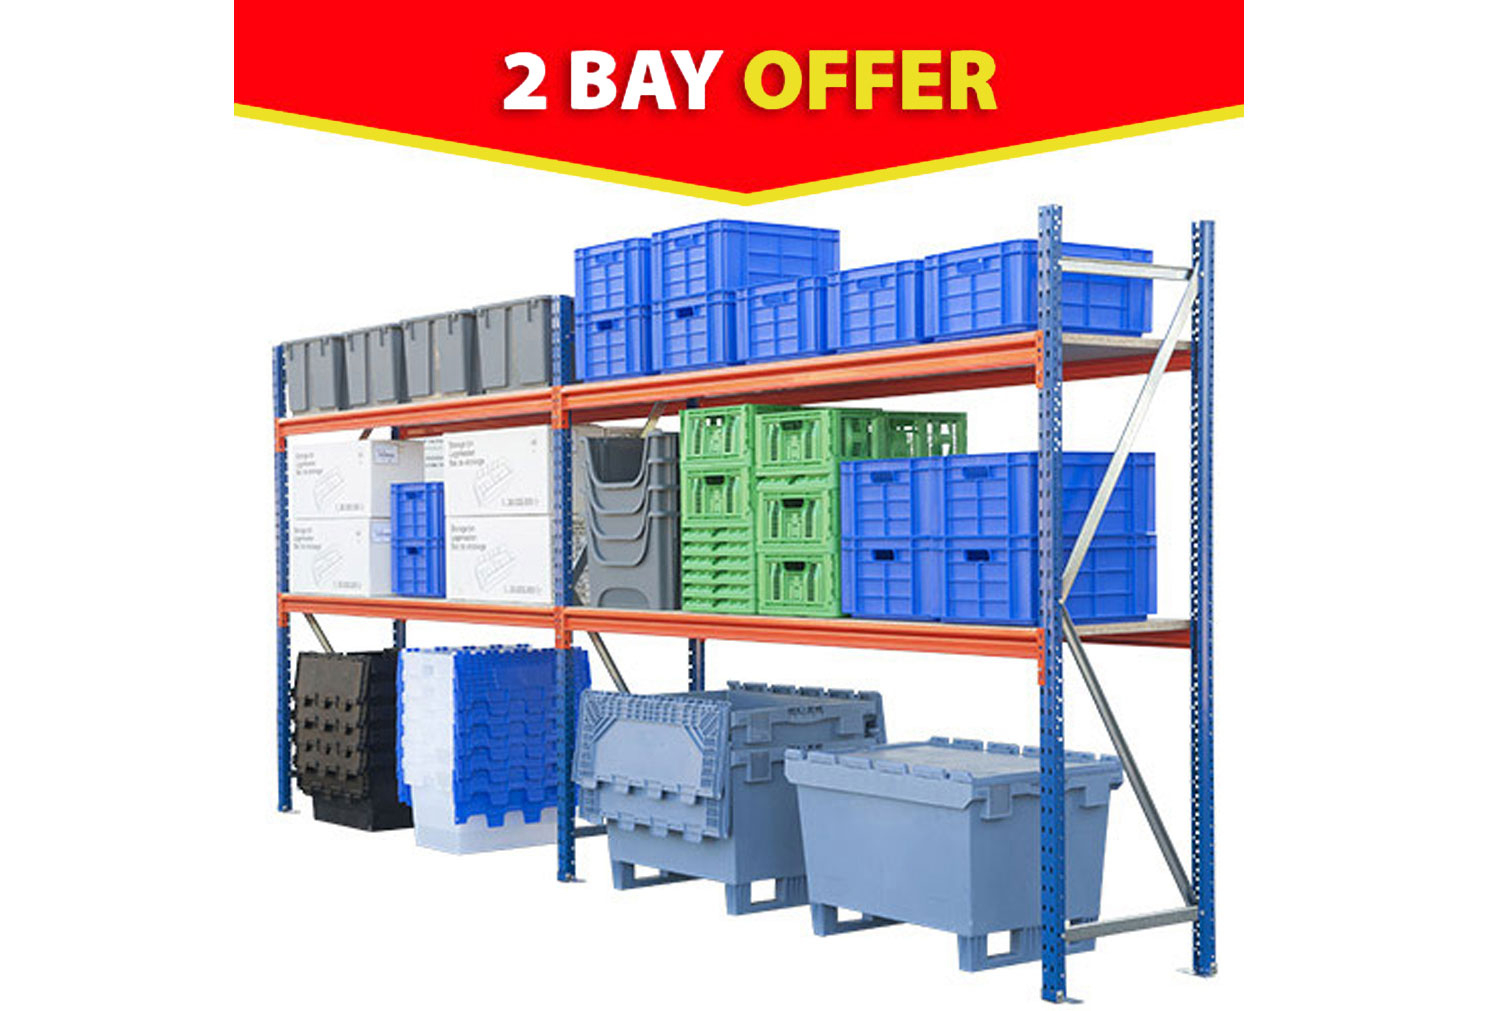 Rapid Span Shelving 2 Bay Bundle Deal 4728wx2000h, 4728wx600dx2000h (mm), Express Delivery